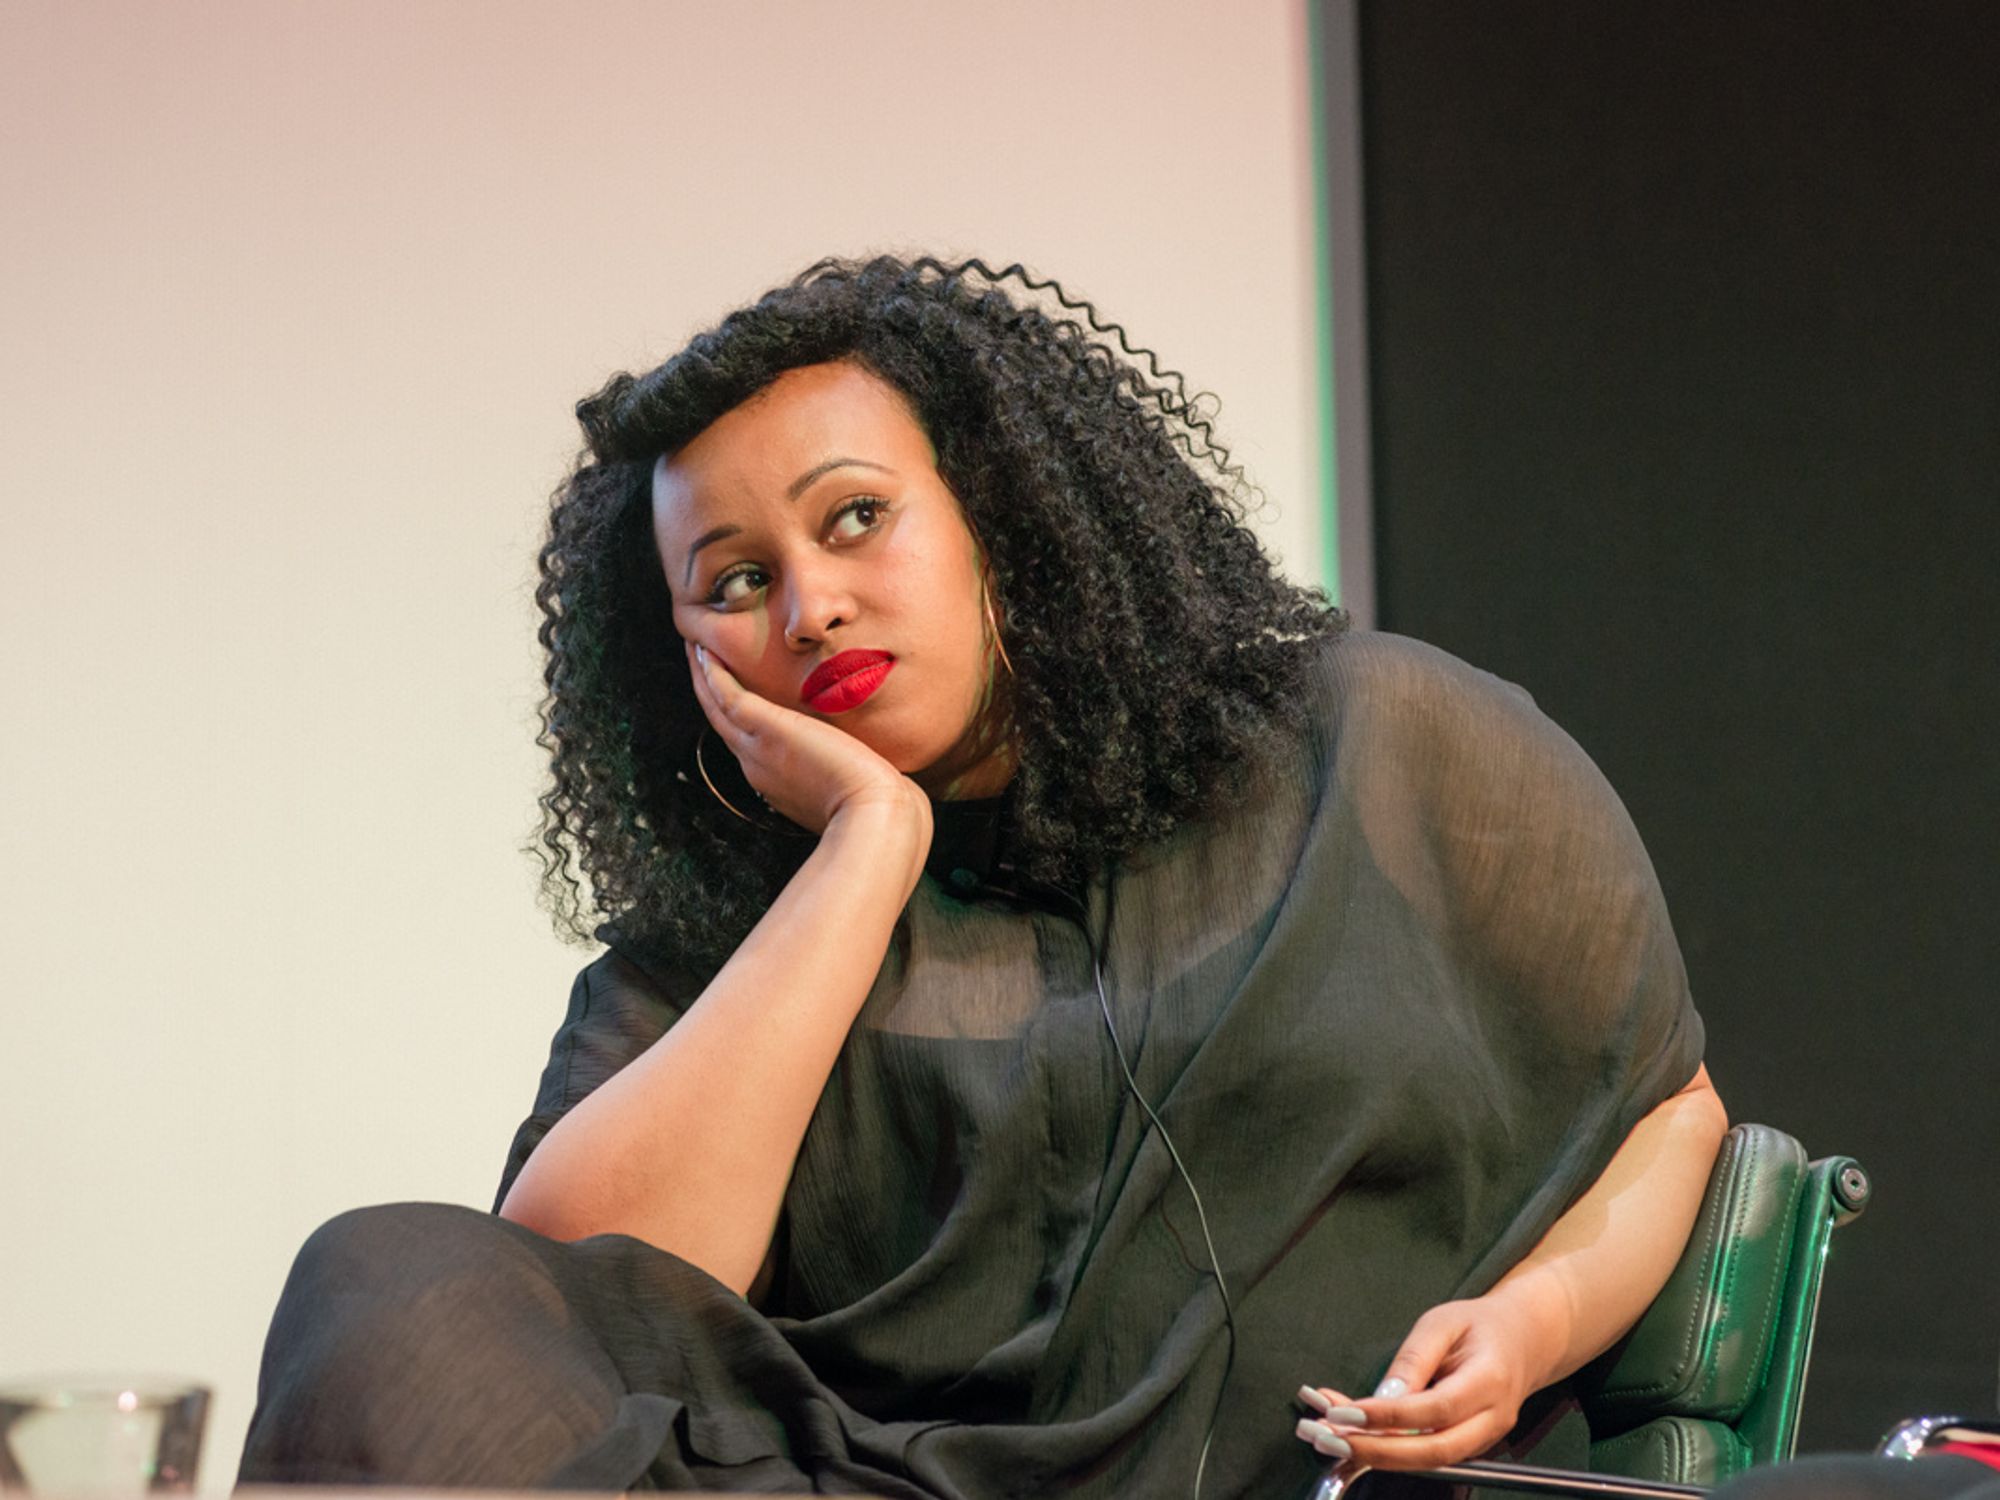 Interview: Warsan Shire's Raw & Vulnerable Poetry